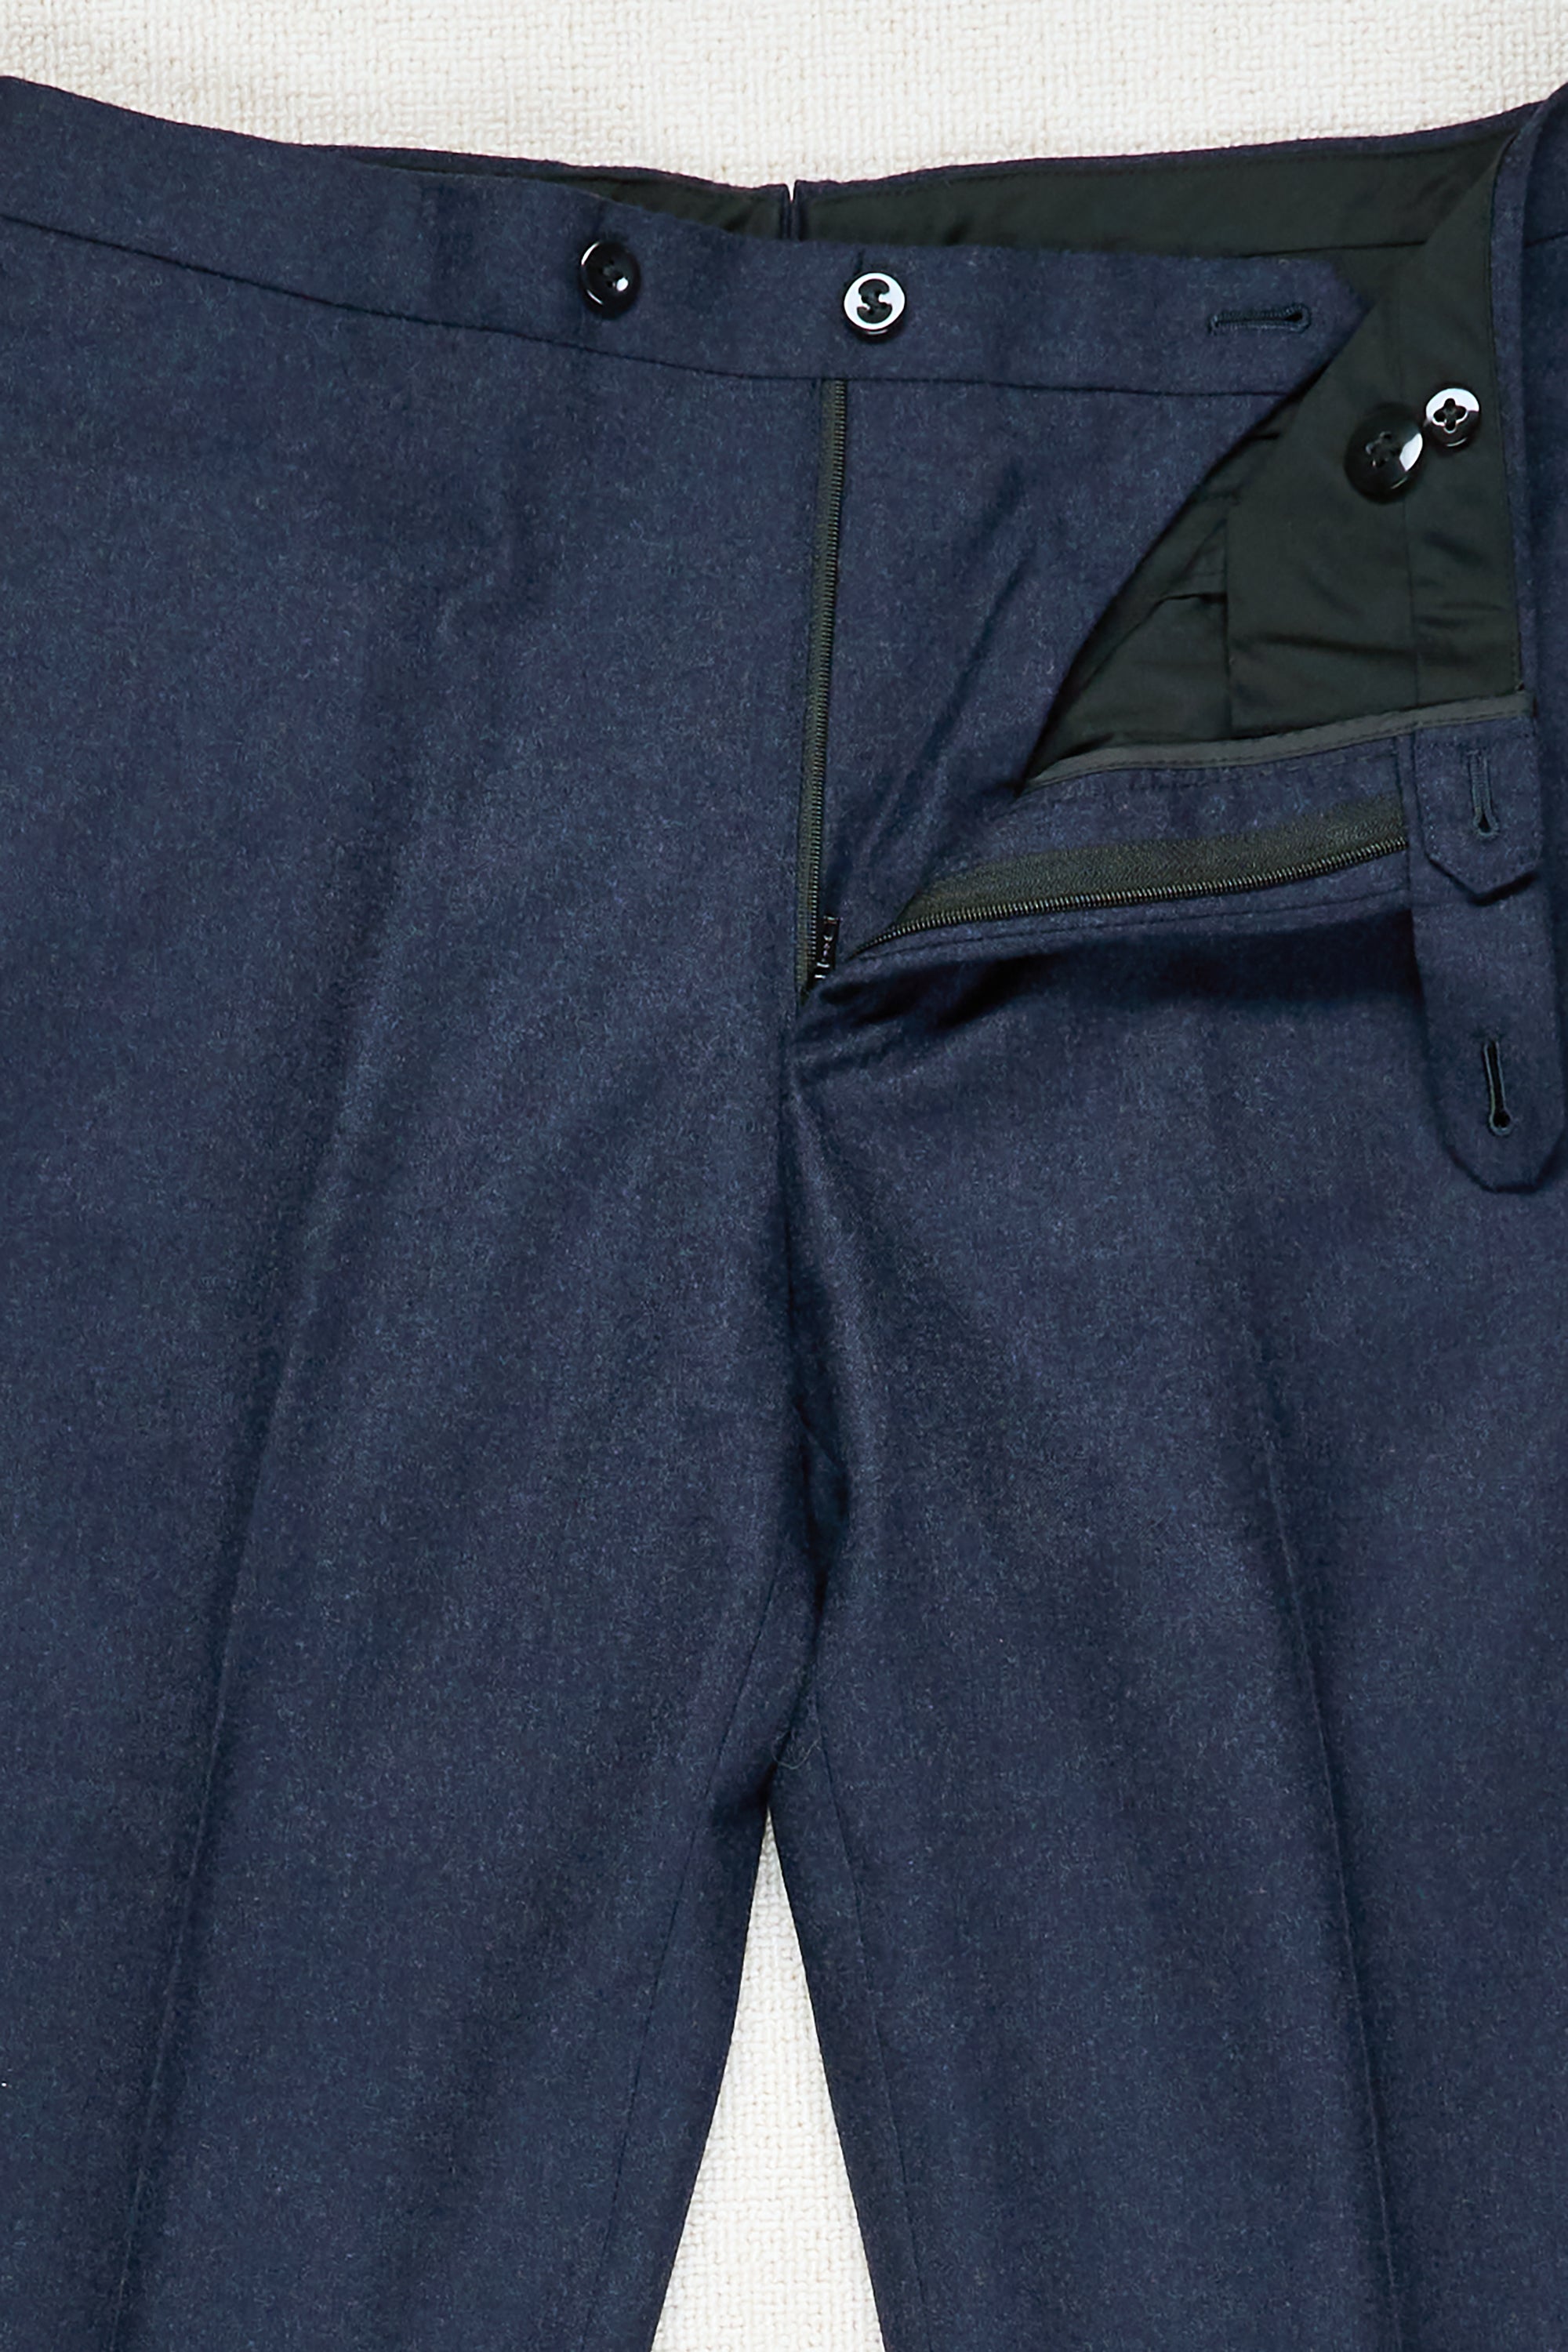 Ring Jacket Navy Flannel Wool Trousers